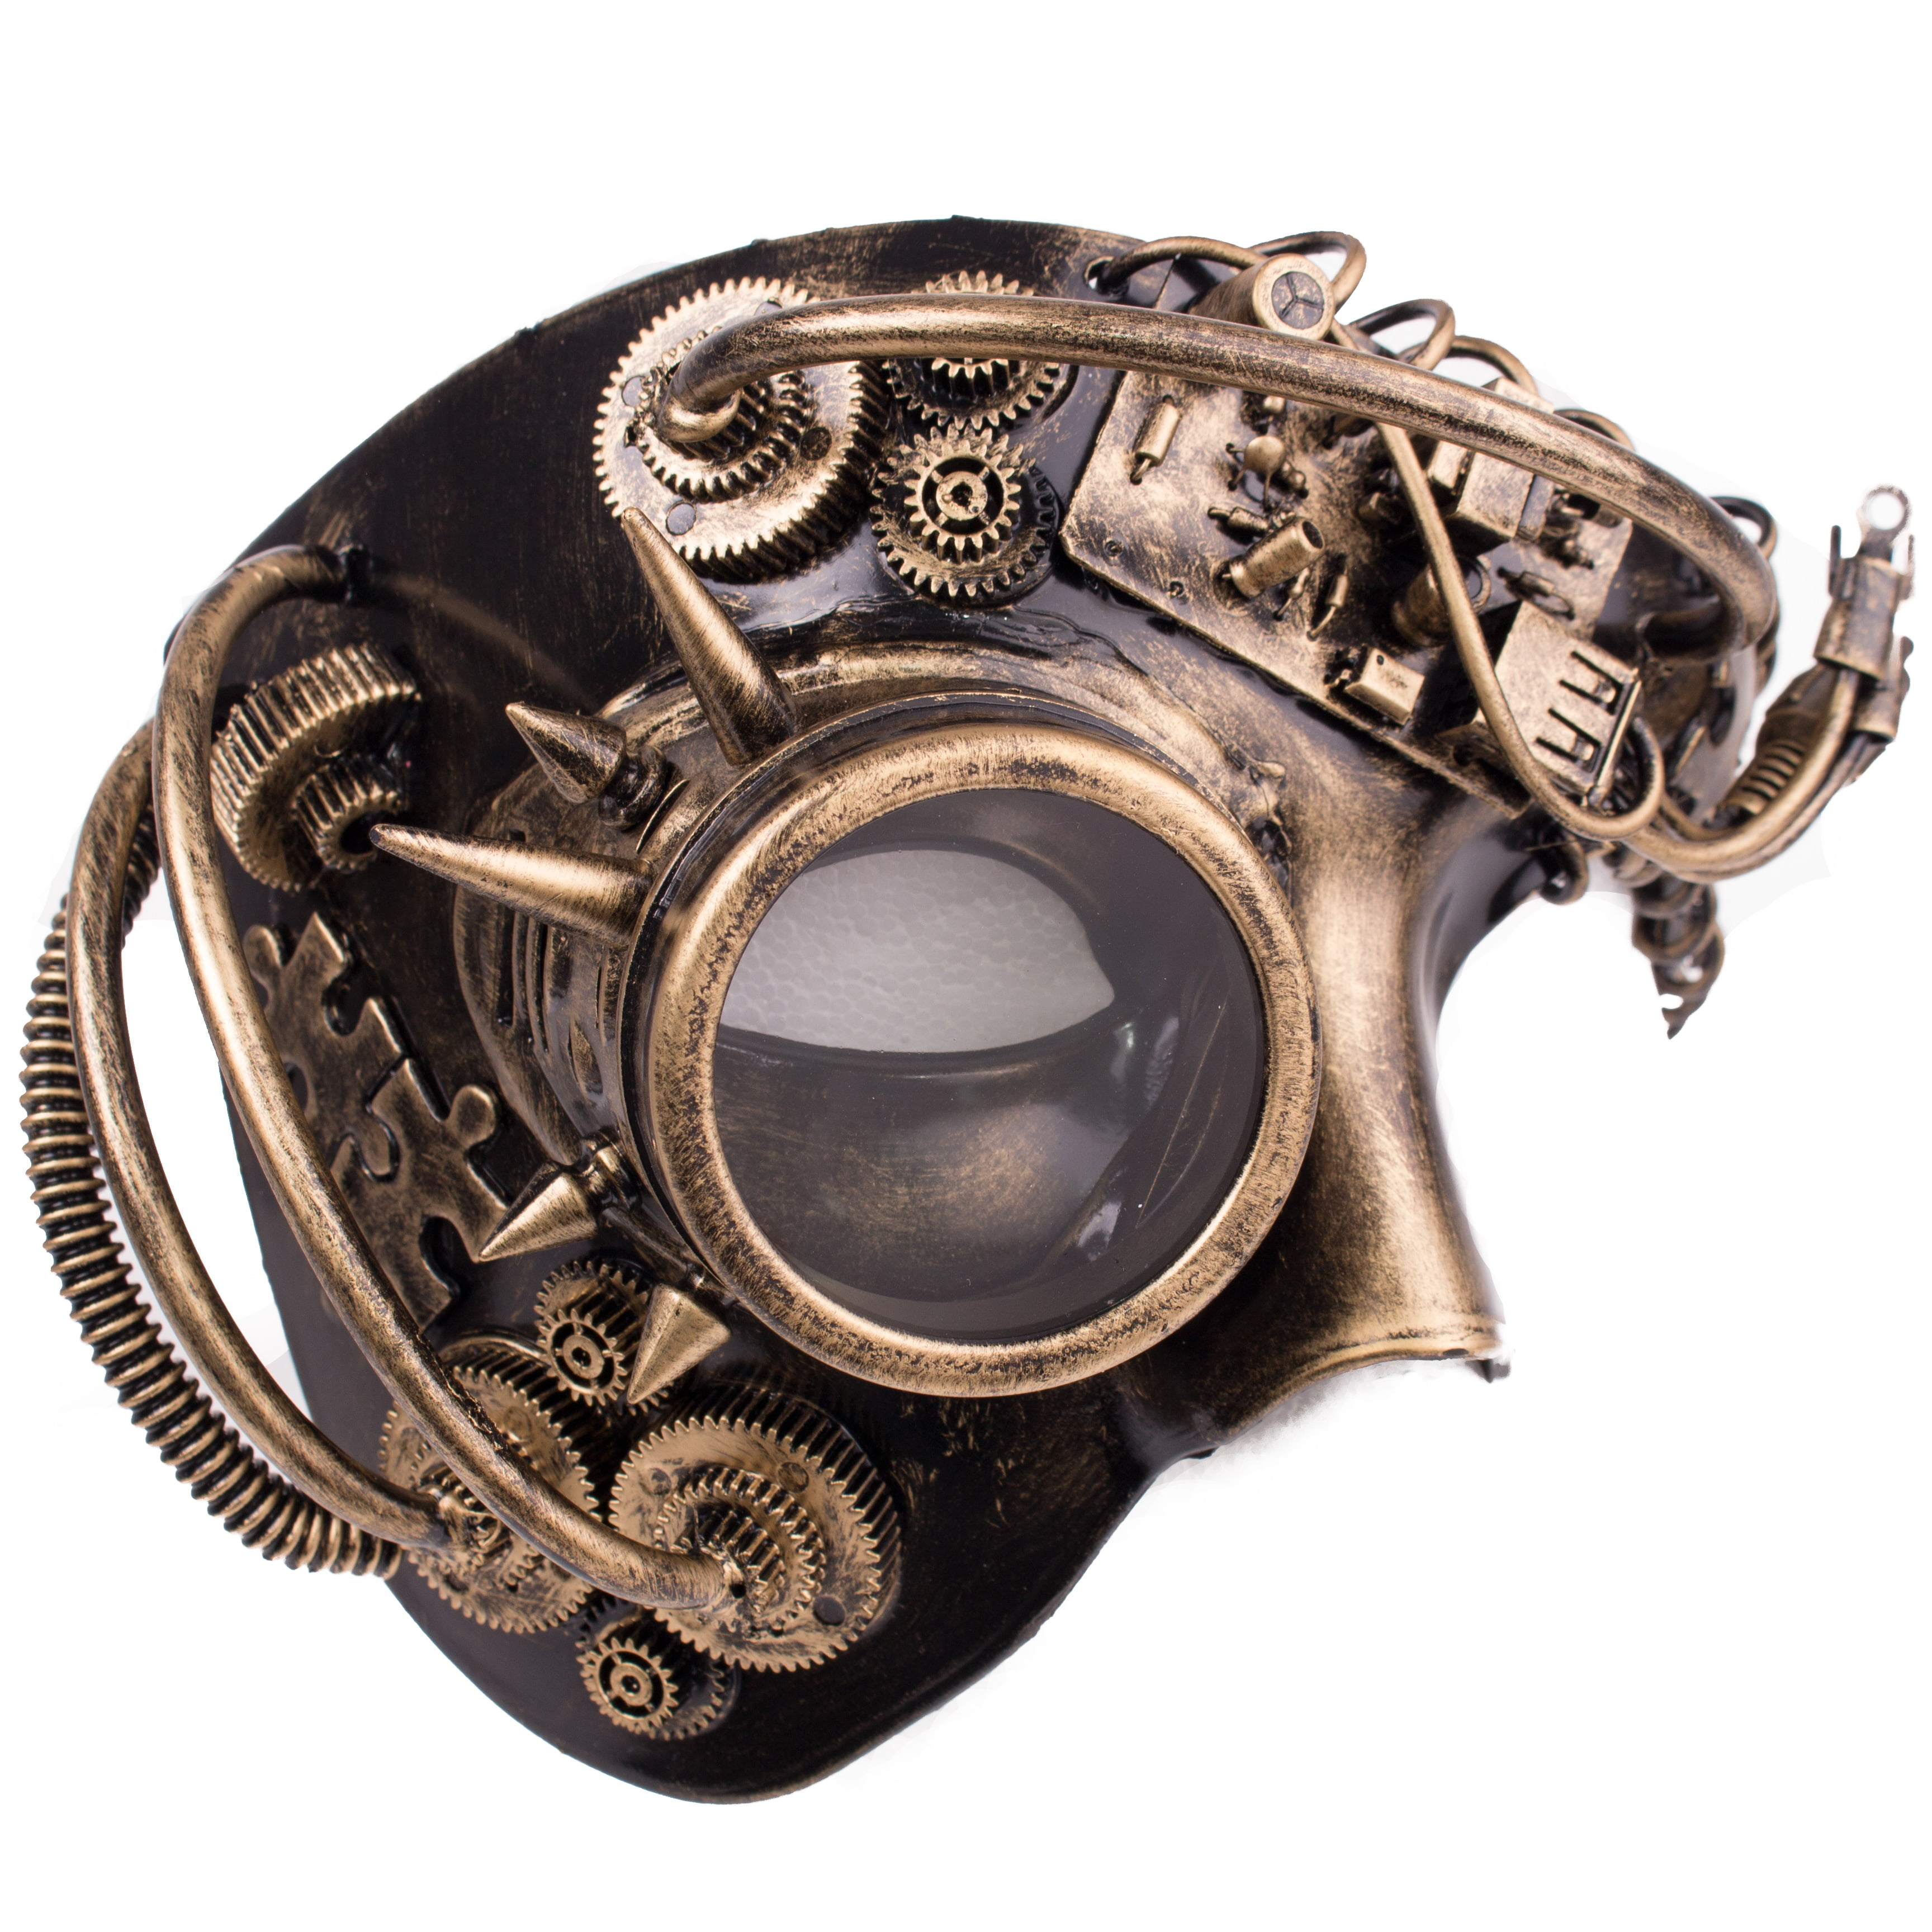 Adutl Men's Steampunk Masquerade Mask Gold Monocle Gears Faux Leather Carnivale 